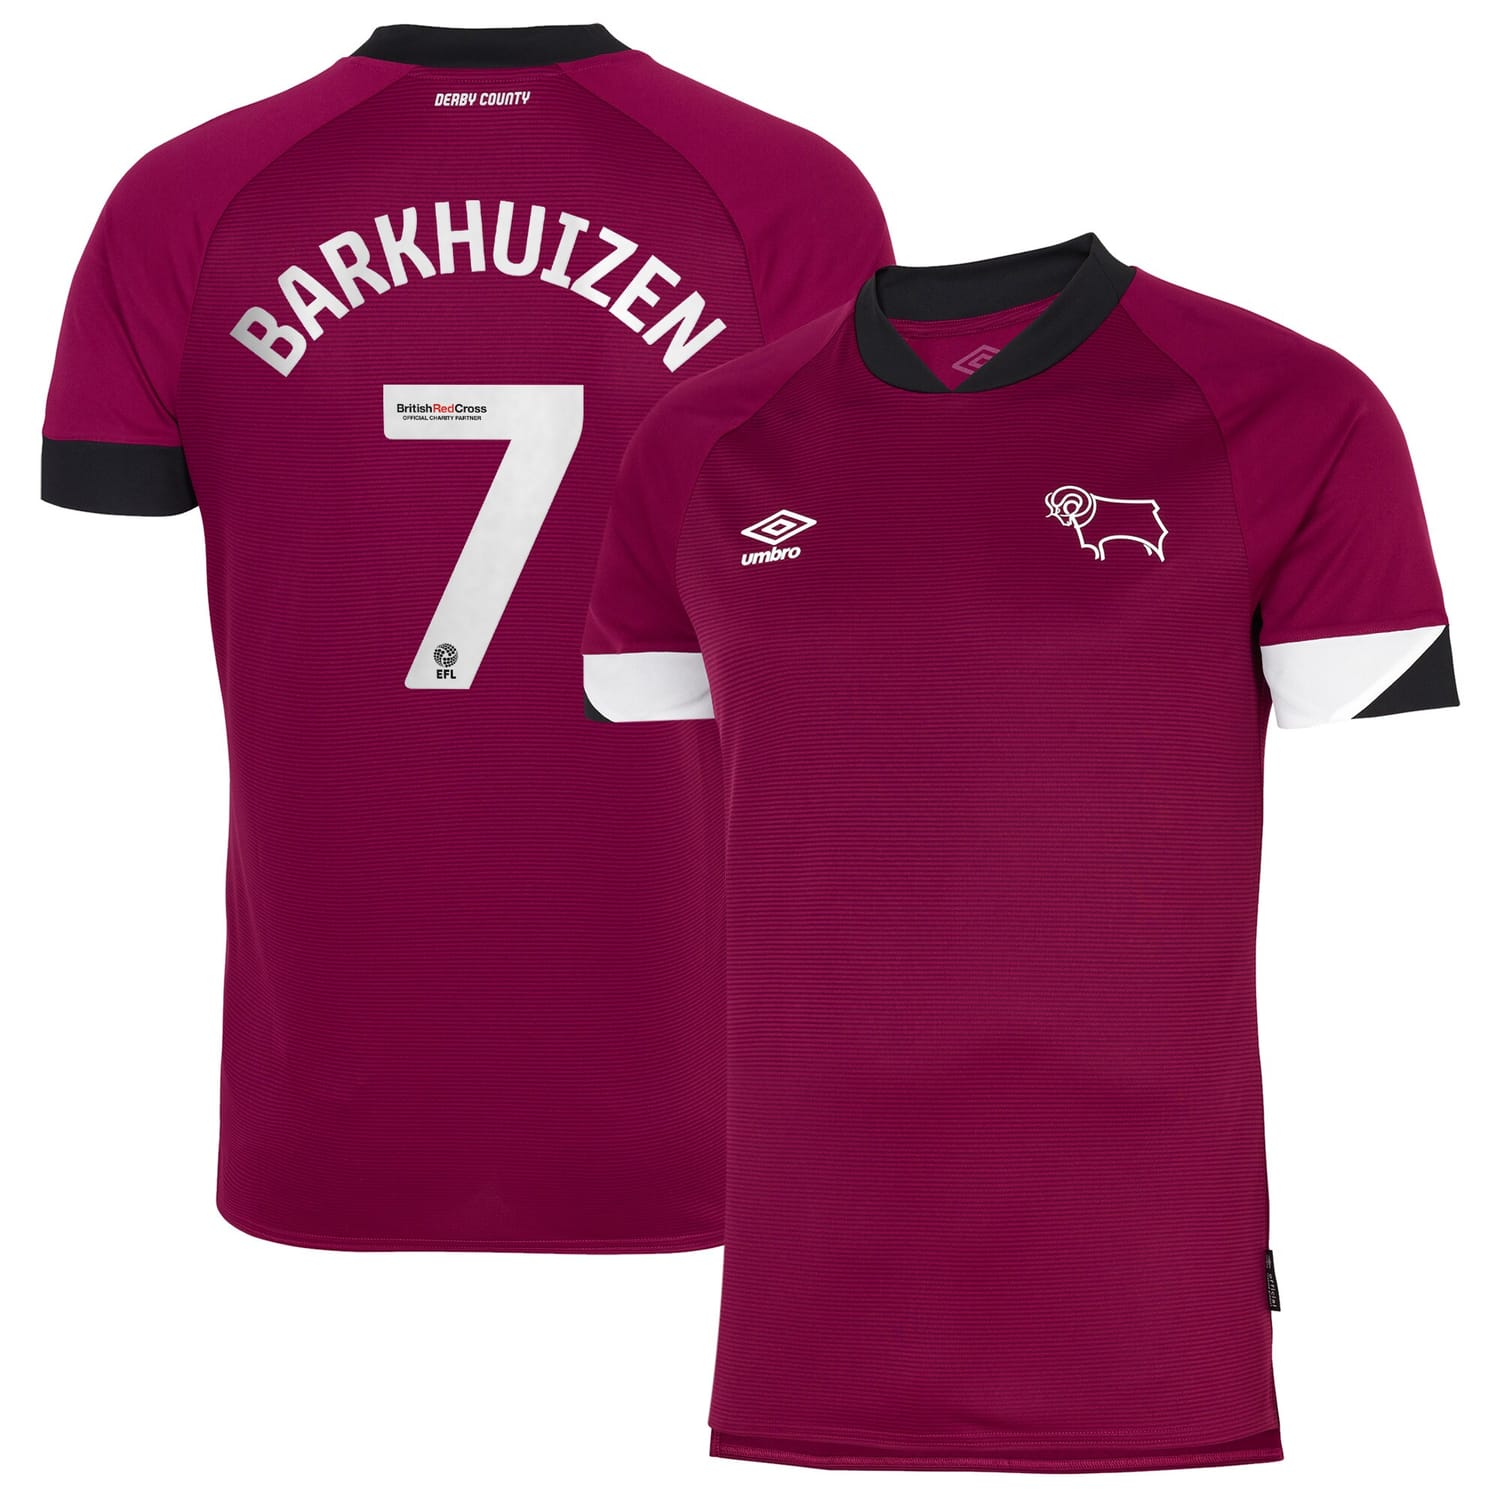 EFL League One Derby County Third Jersey Shirt 2022-23 player Barkhuizen 7 printing for Men